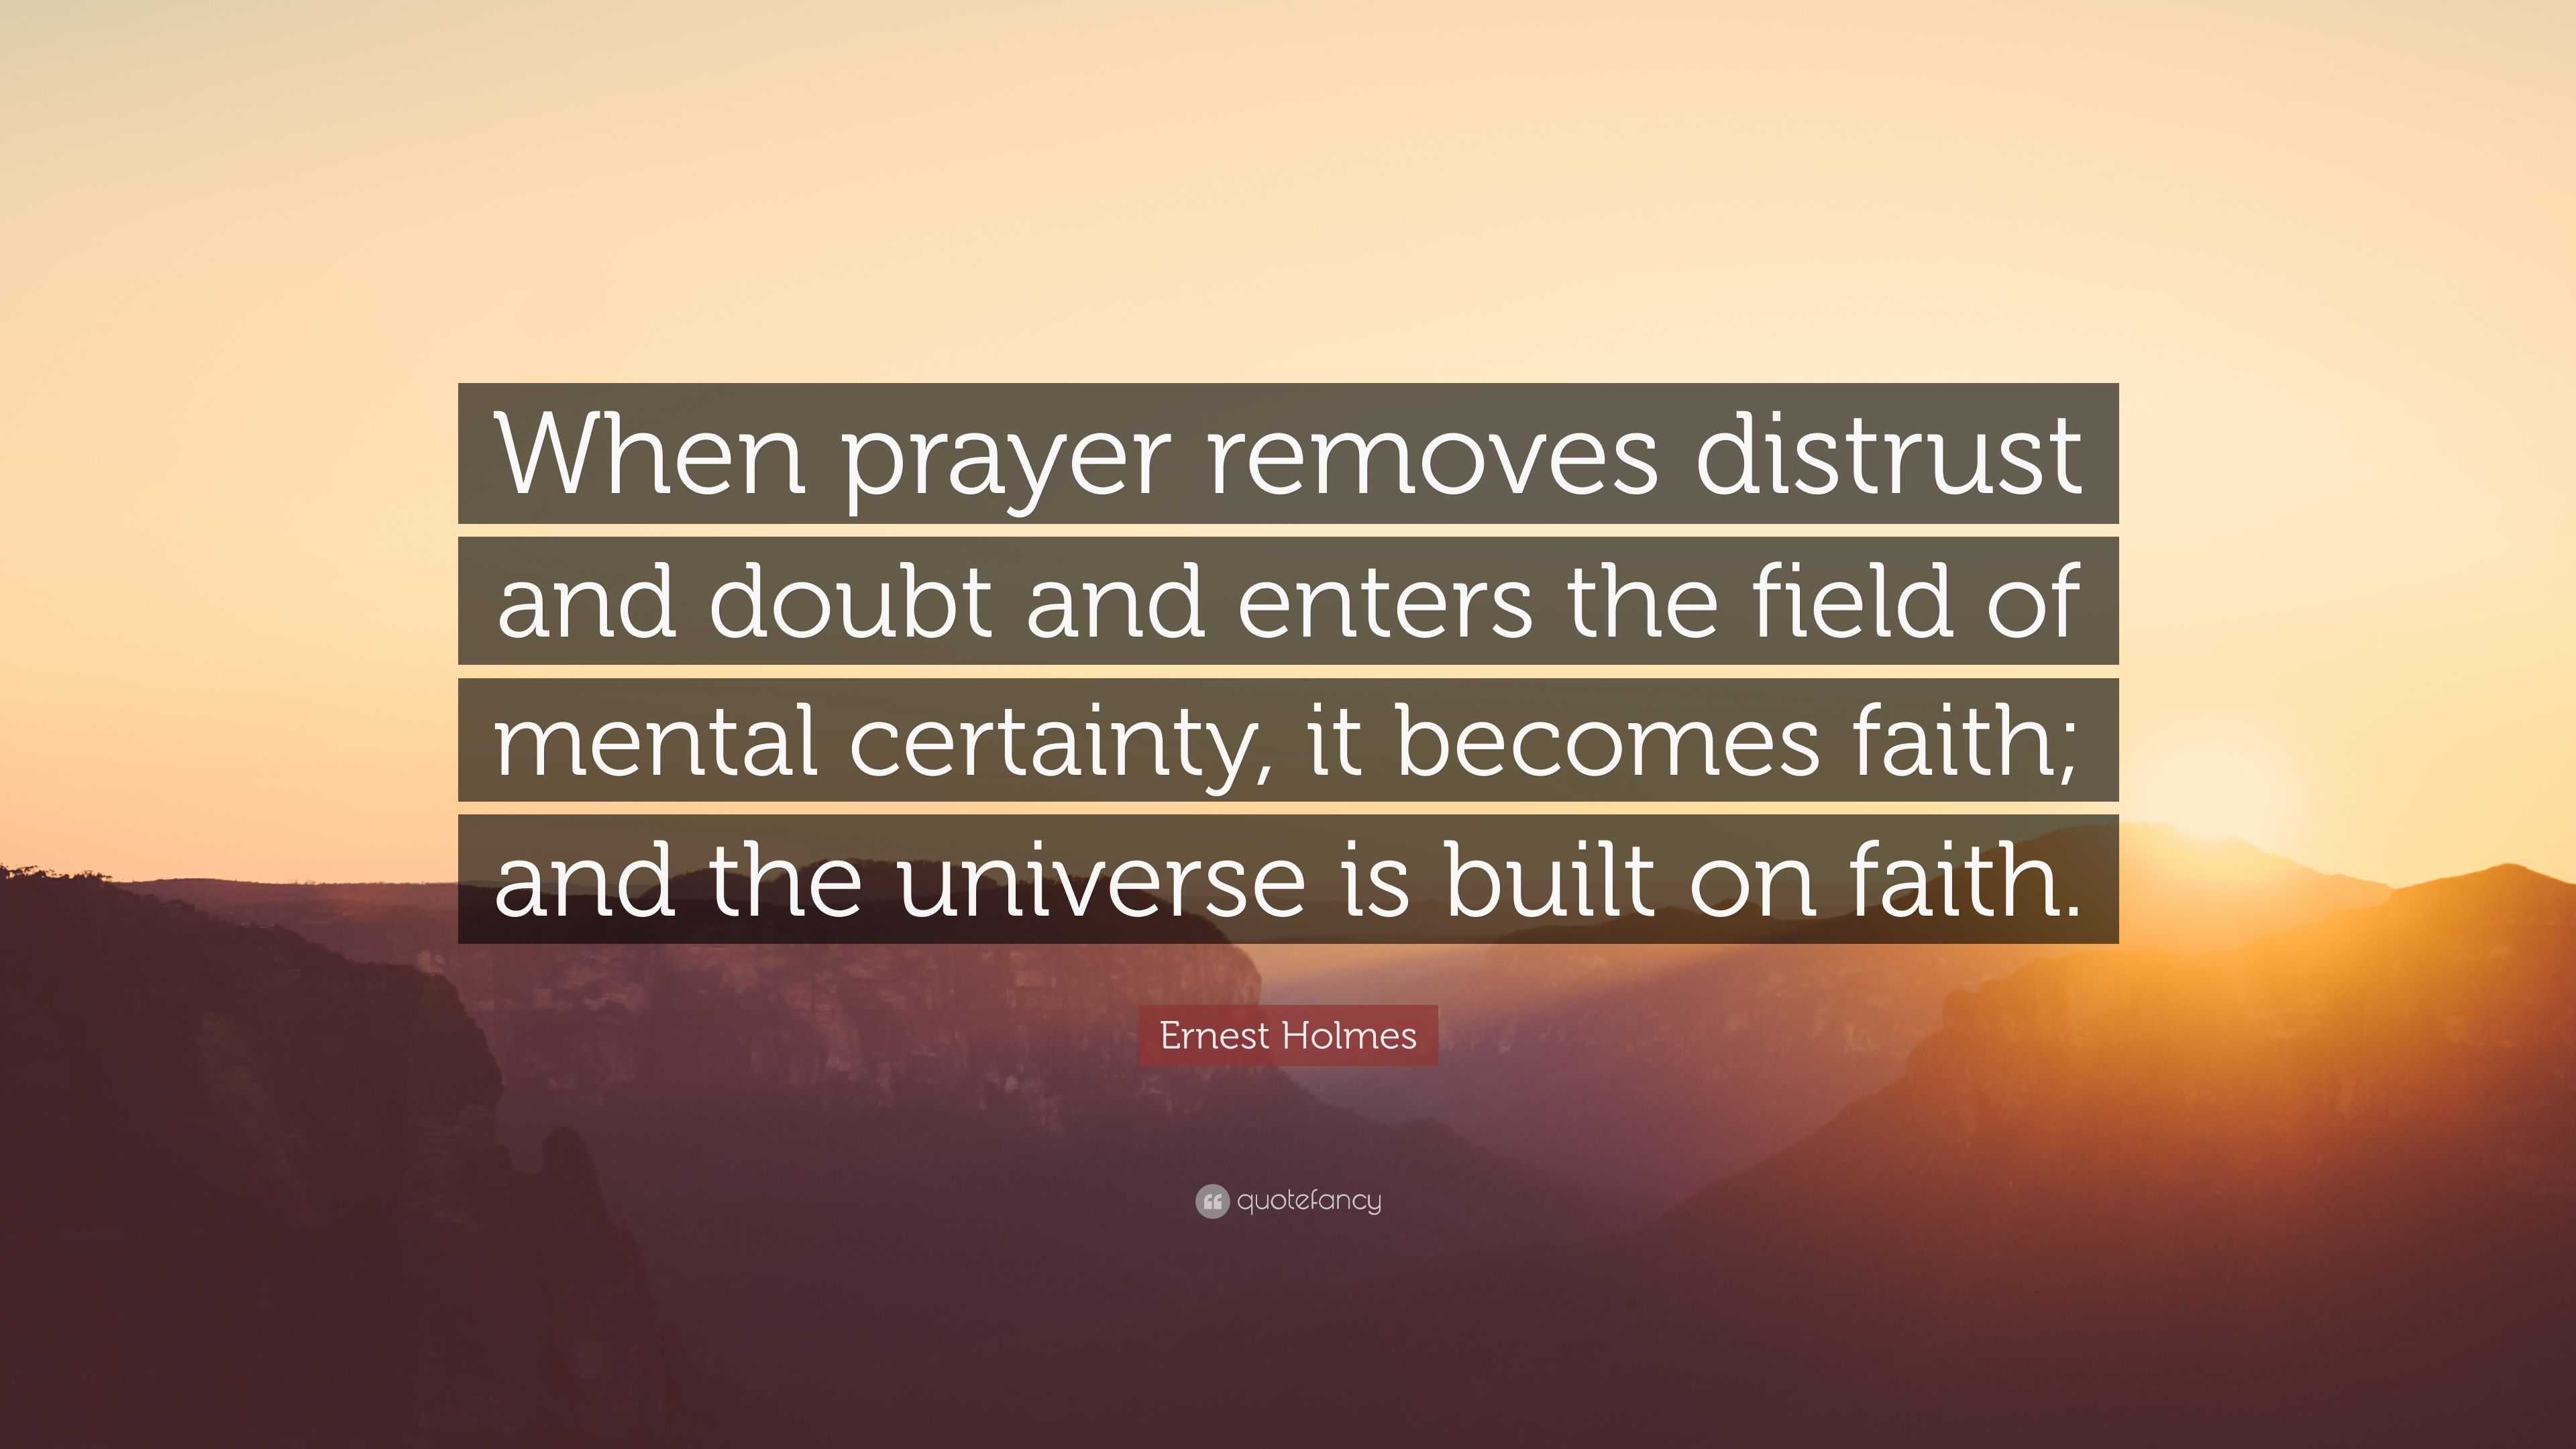 Ernest Holmes Quote: “When prayer removes distrust and doubt and enters ...